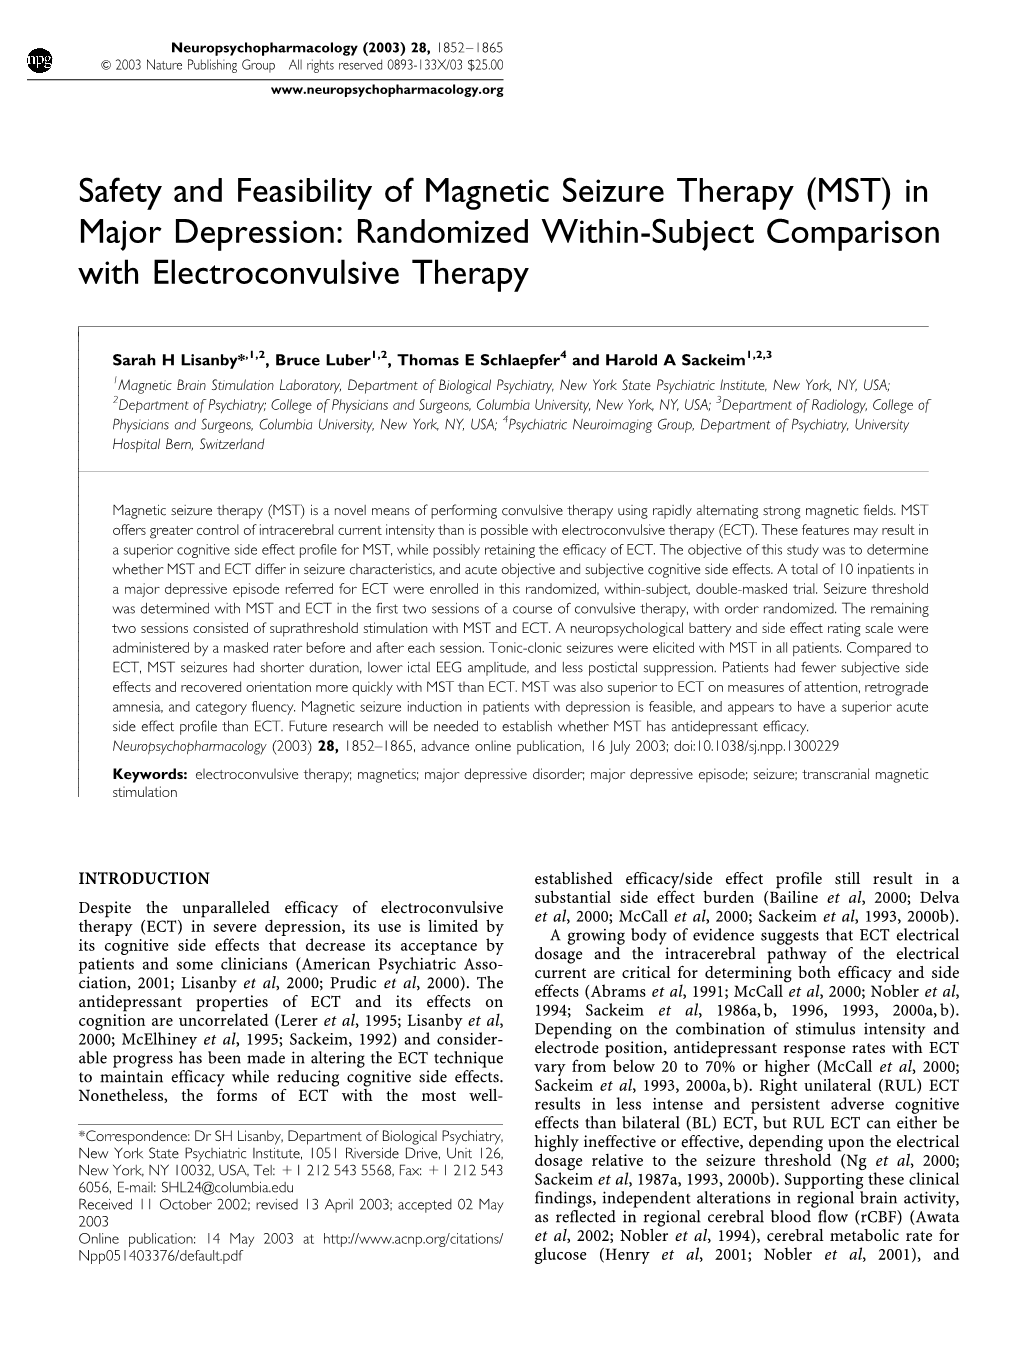 Safety and Feasibility of Magnetic Seizure Therapy (MST) in Major Depression: Randomized Within-Subject Comparison with Electroconvulsive Therapy